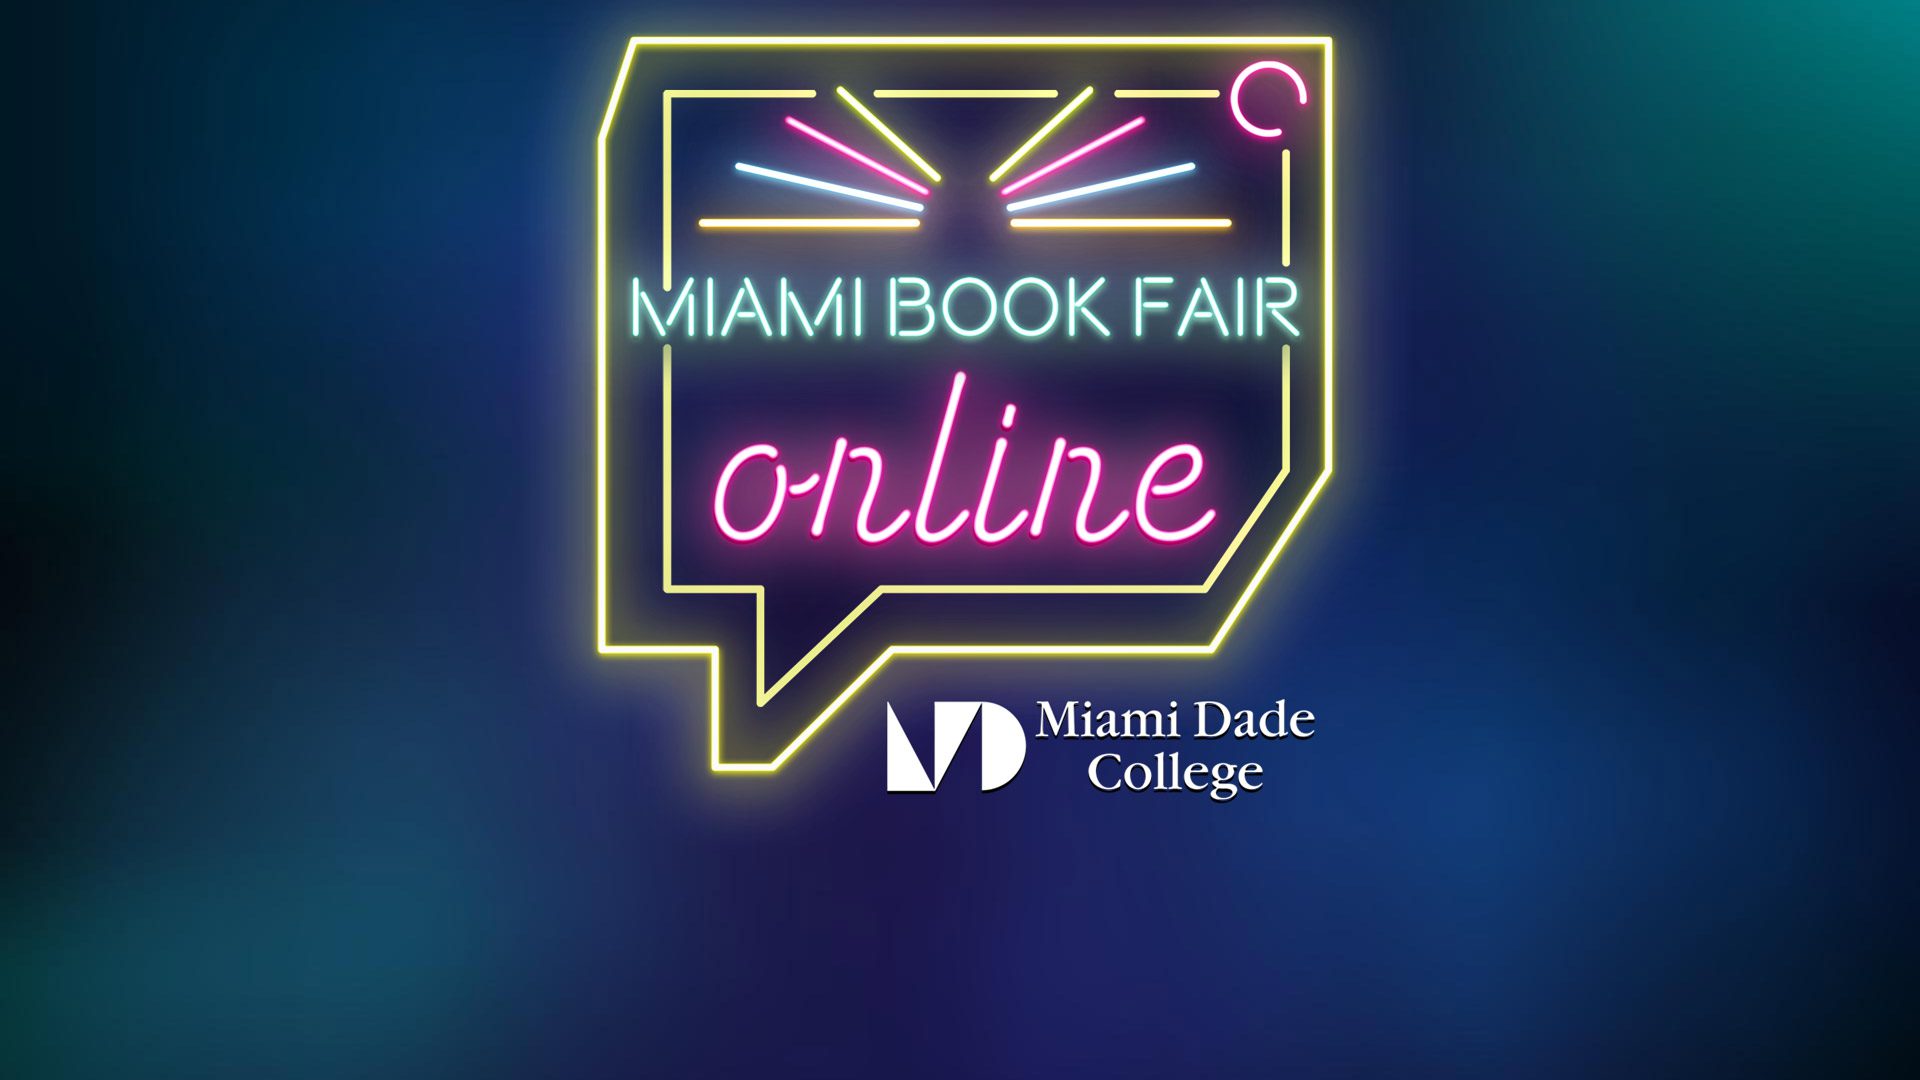 Frontlist | Miami Book Fair occur online event due to COVID concerns